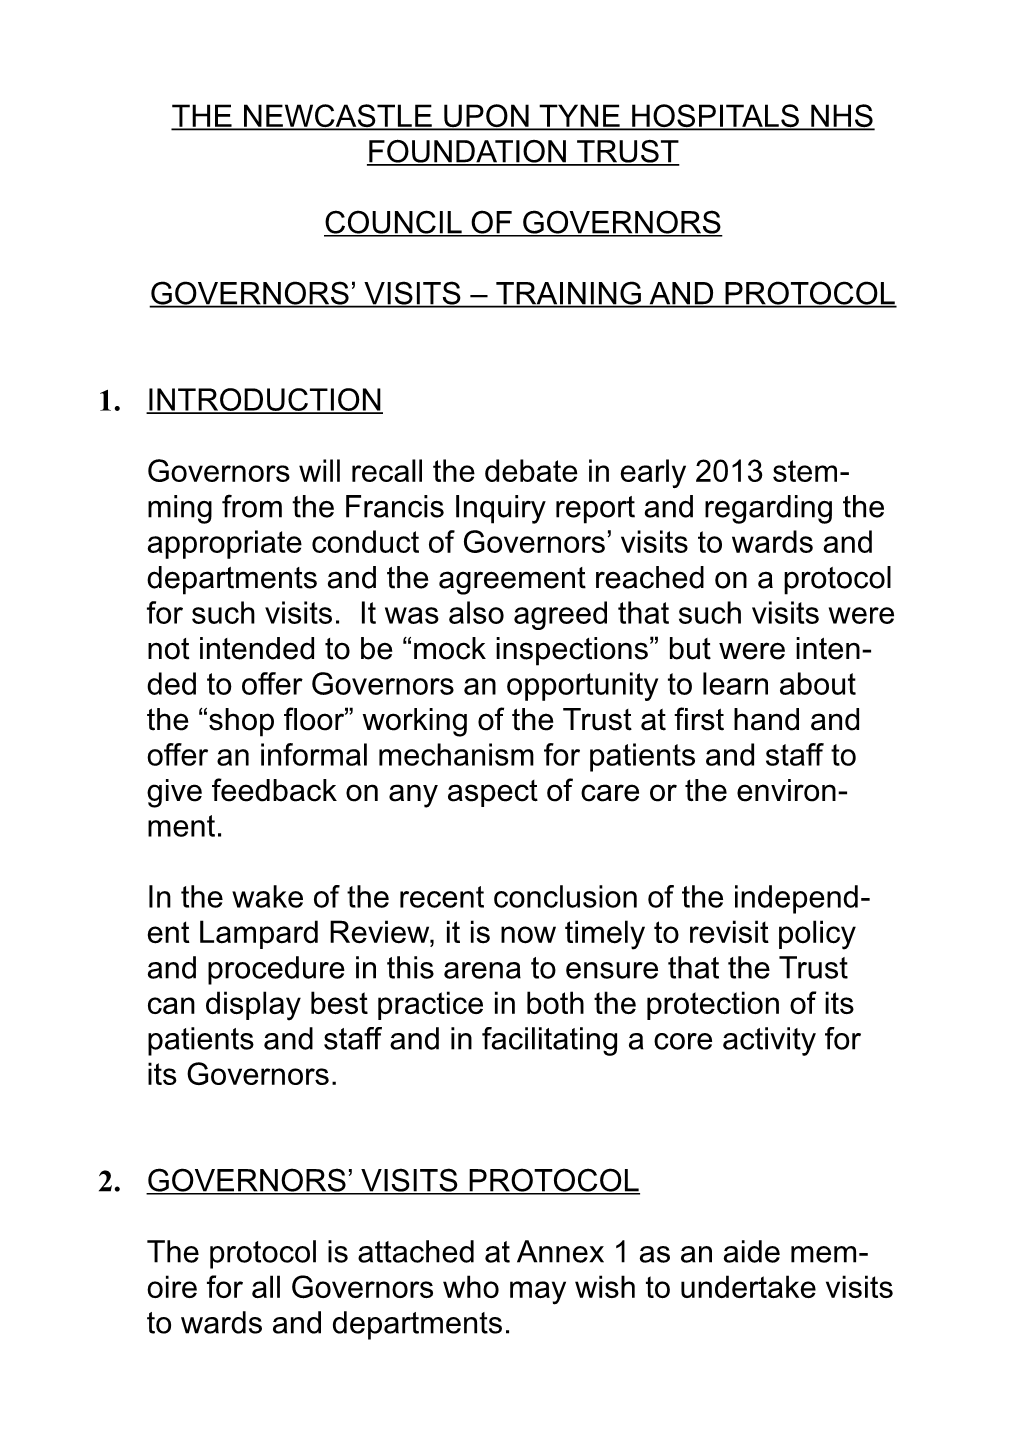 Governors Visits Training and Protocol